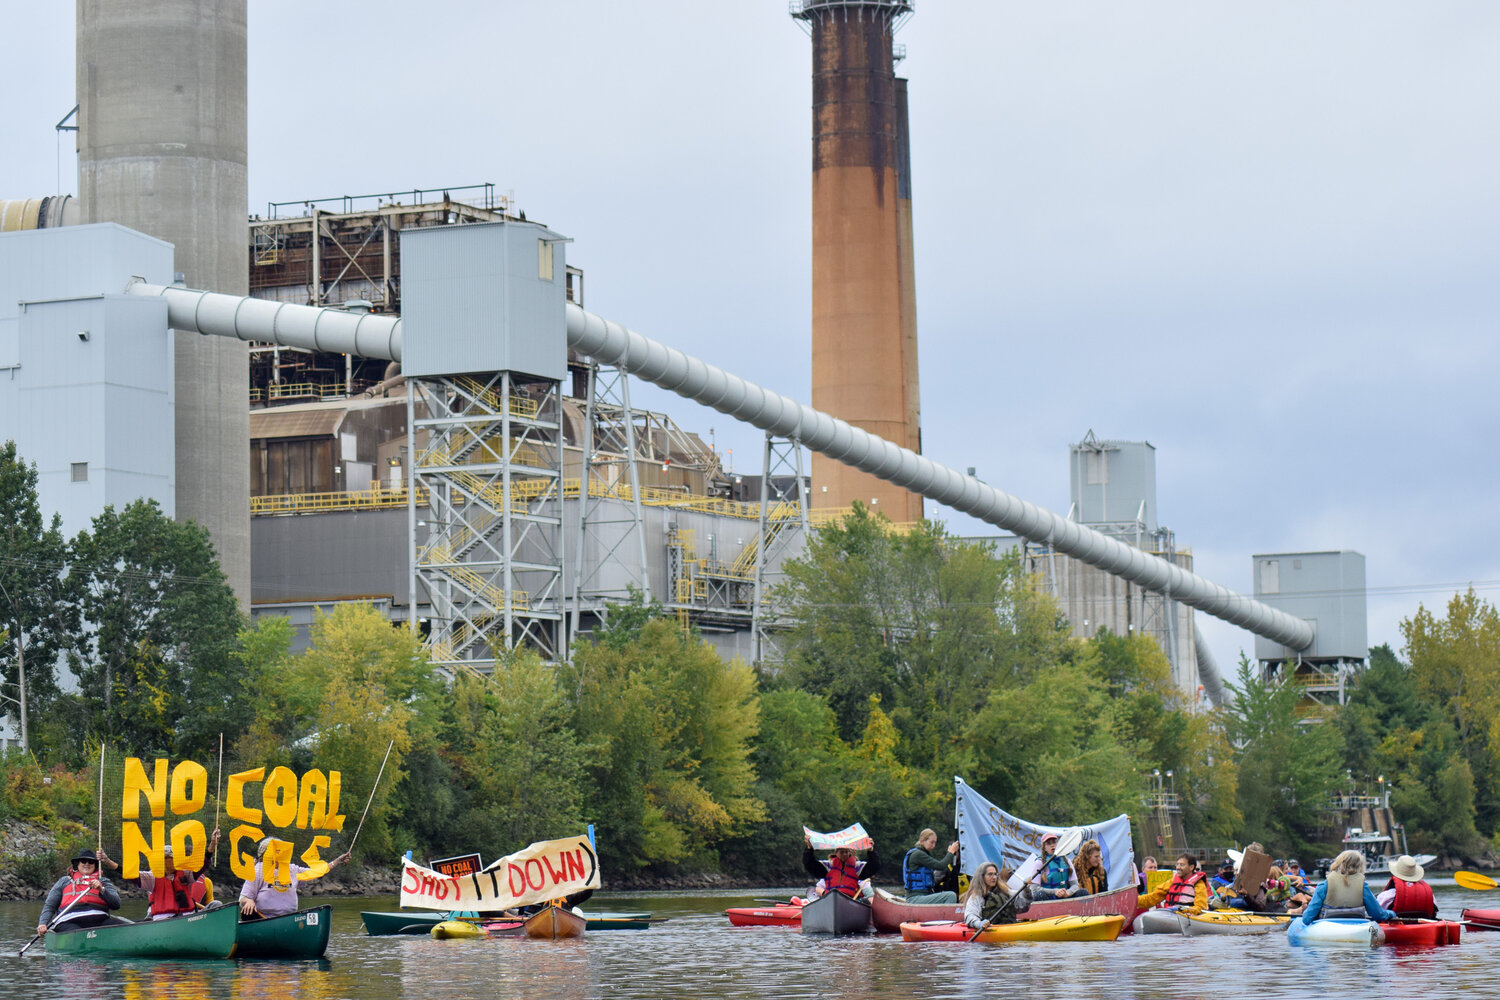 image of a group of kayaks and canoes in the Merrimack River, holding various signs that say "shut it down" and "no coal no gas." The big looming coal plant is in the background